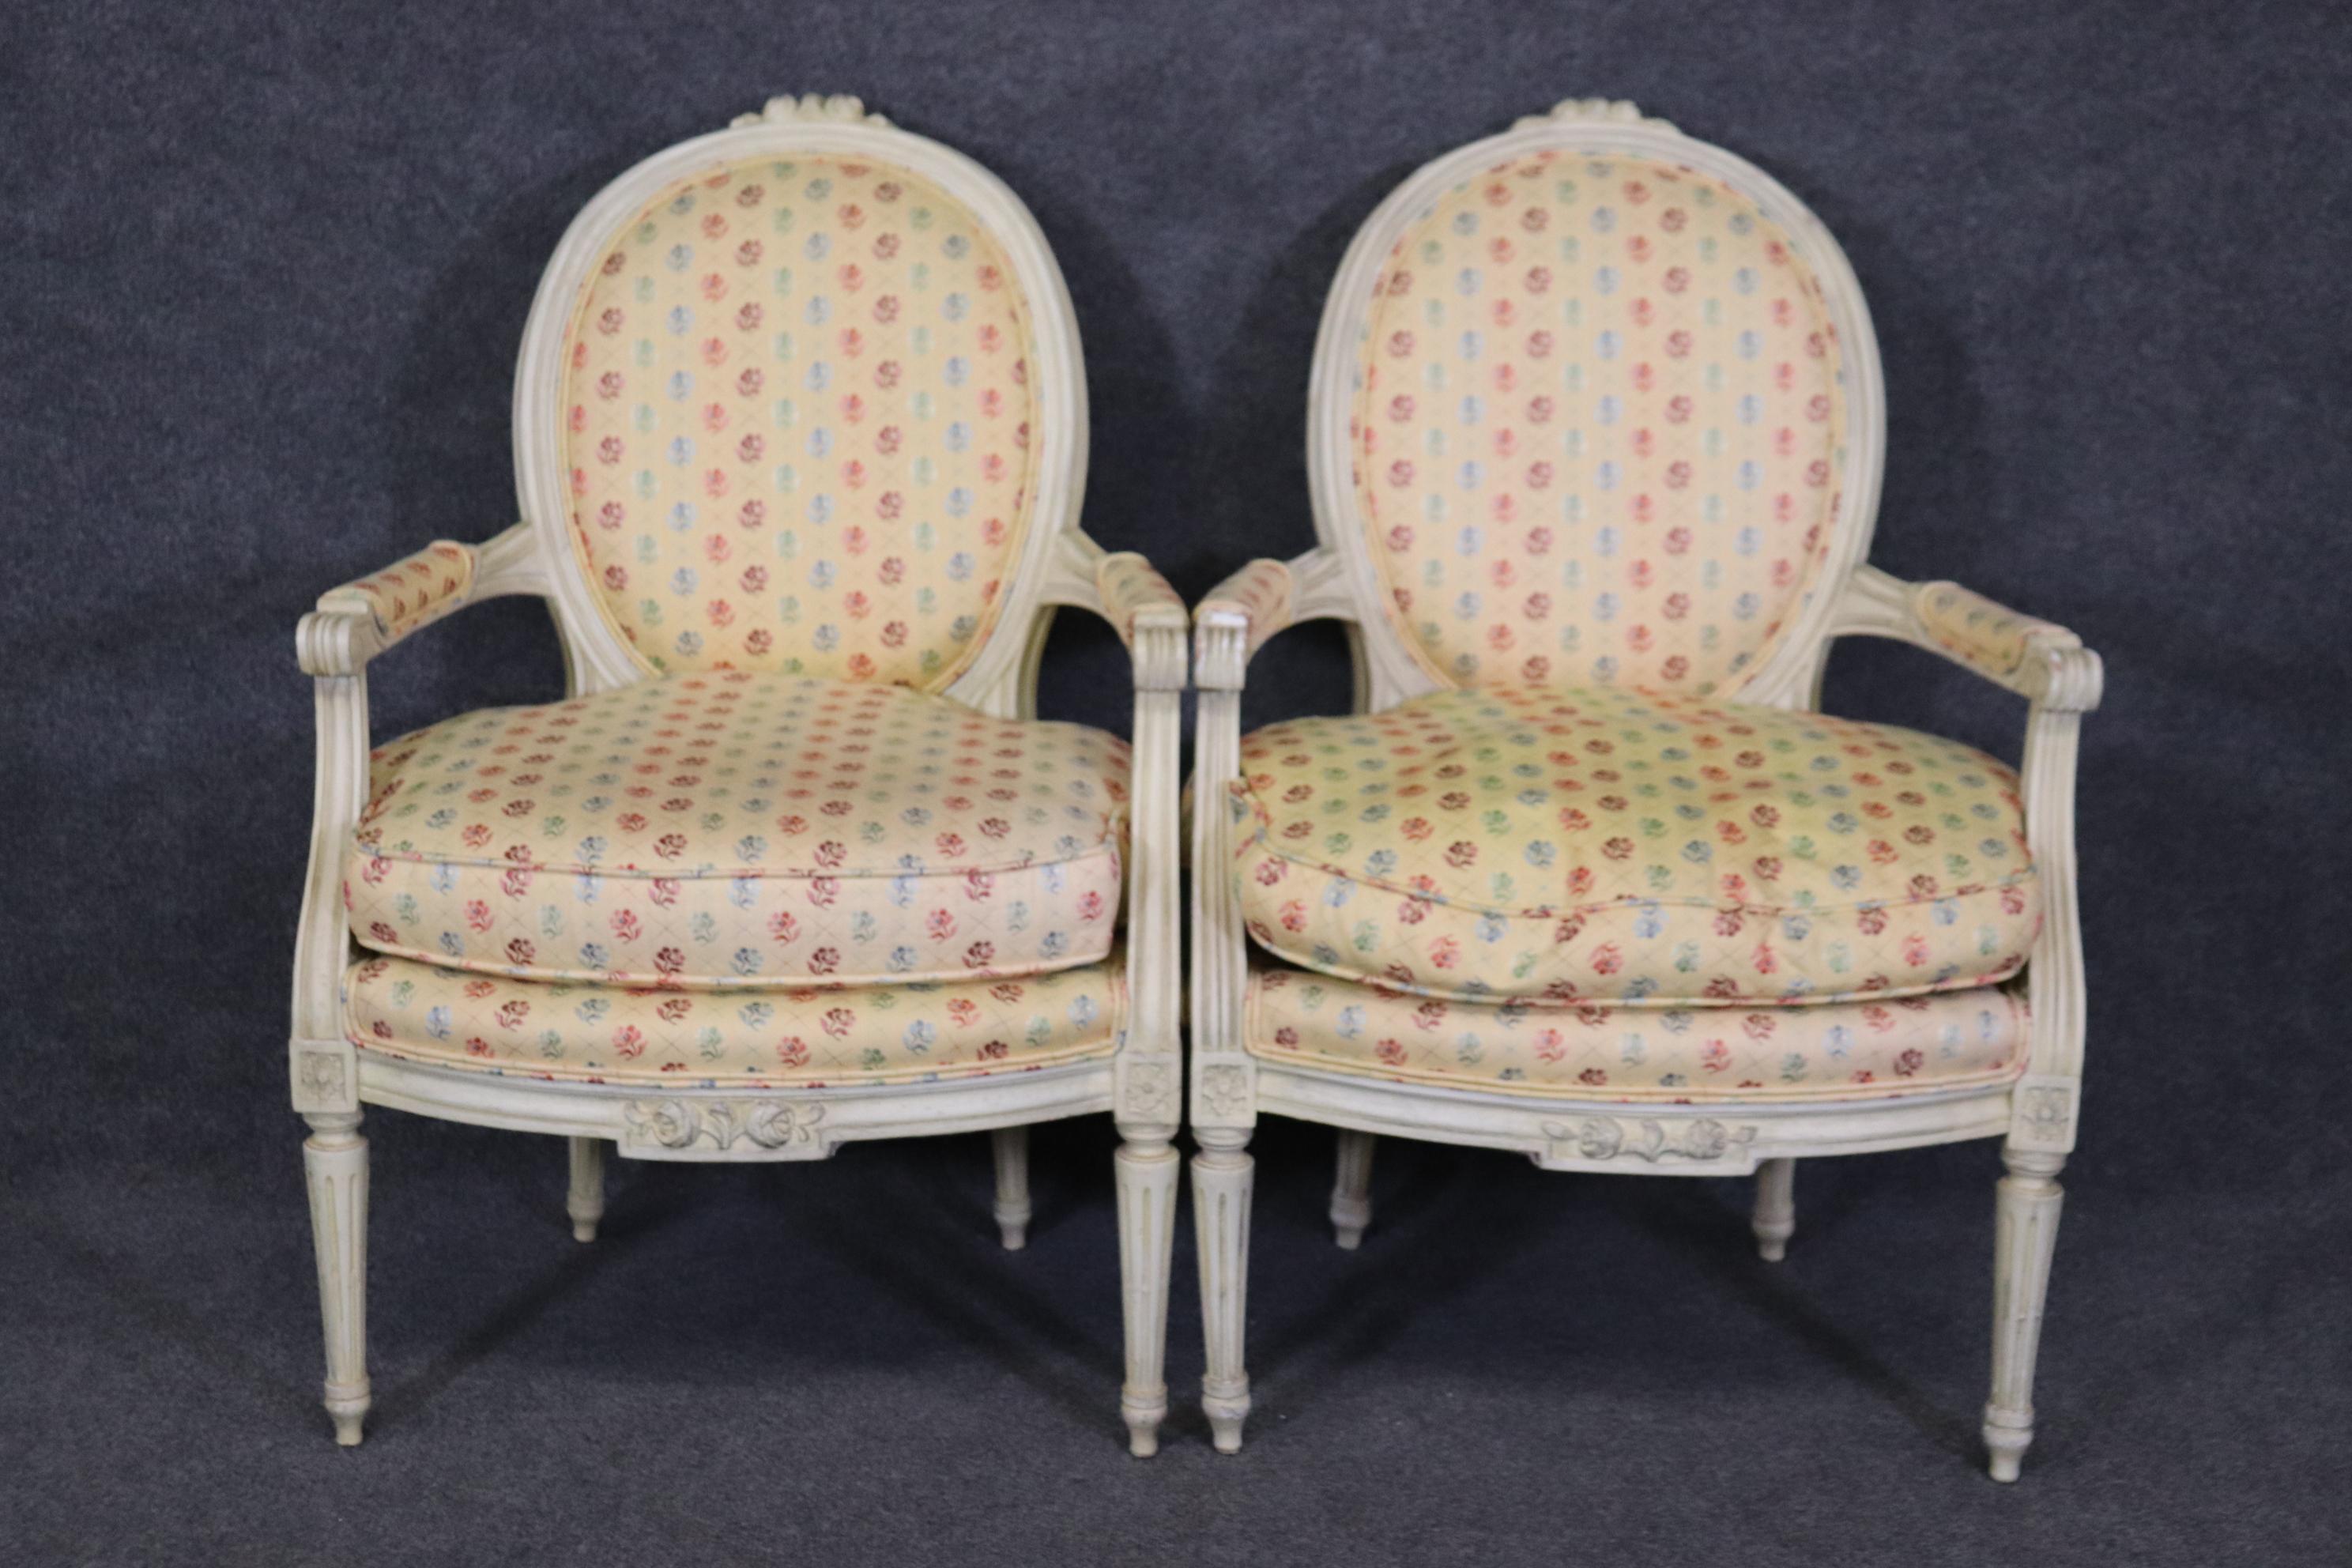 Dimensions- H: 35 1/2in W: 24in D: 25 3/4in SH: 18 1/2in 

This antique pair of Louis XVI style creme paint decorated armchairs accent chairs is perfect for you and your home and is a lovely example of high quality furniture from the 20th century!